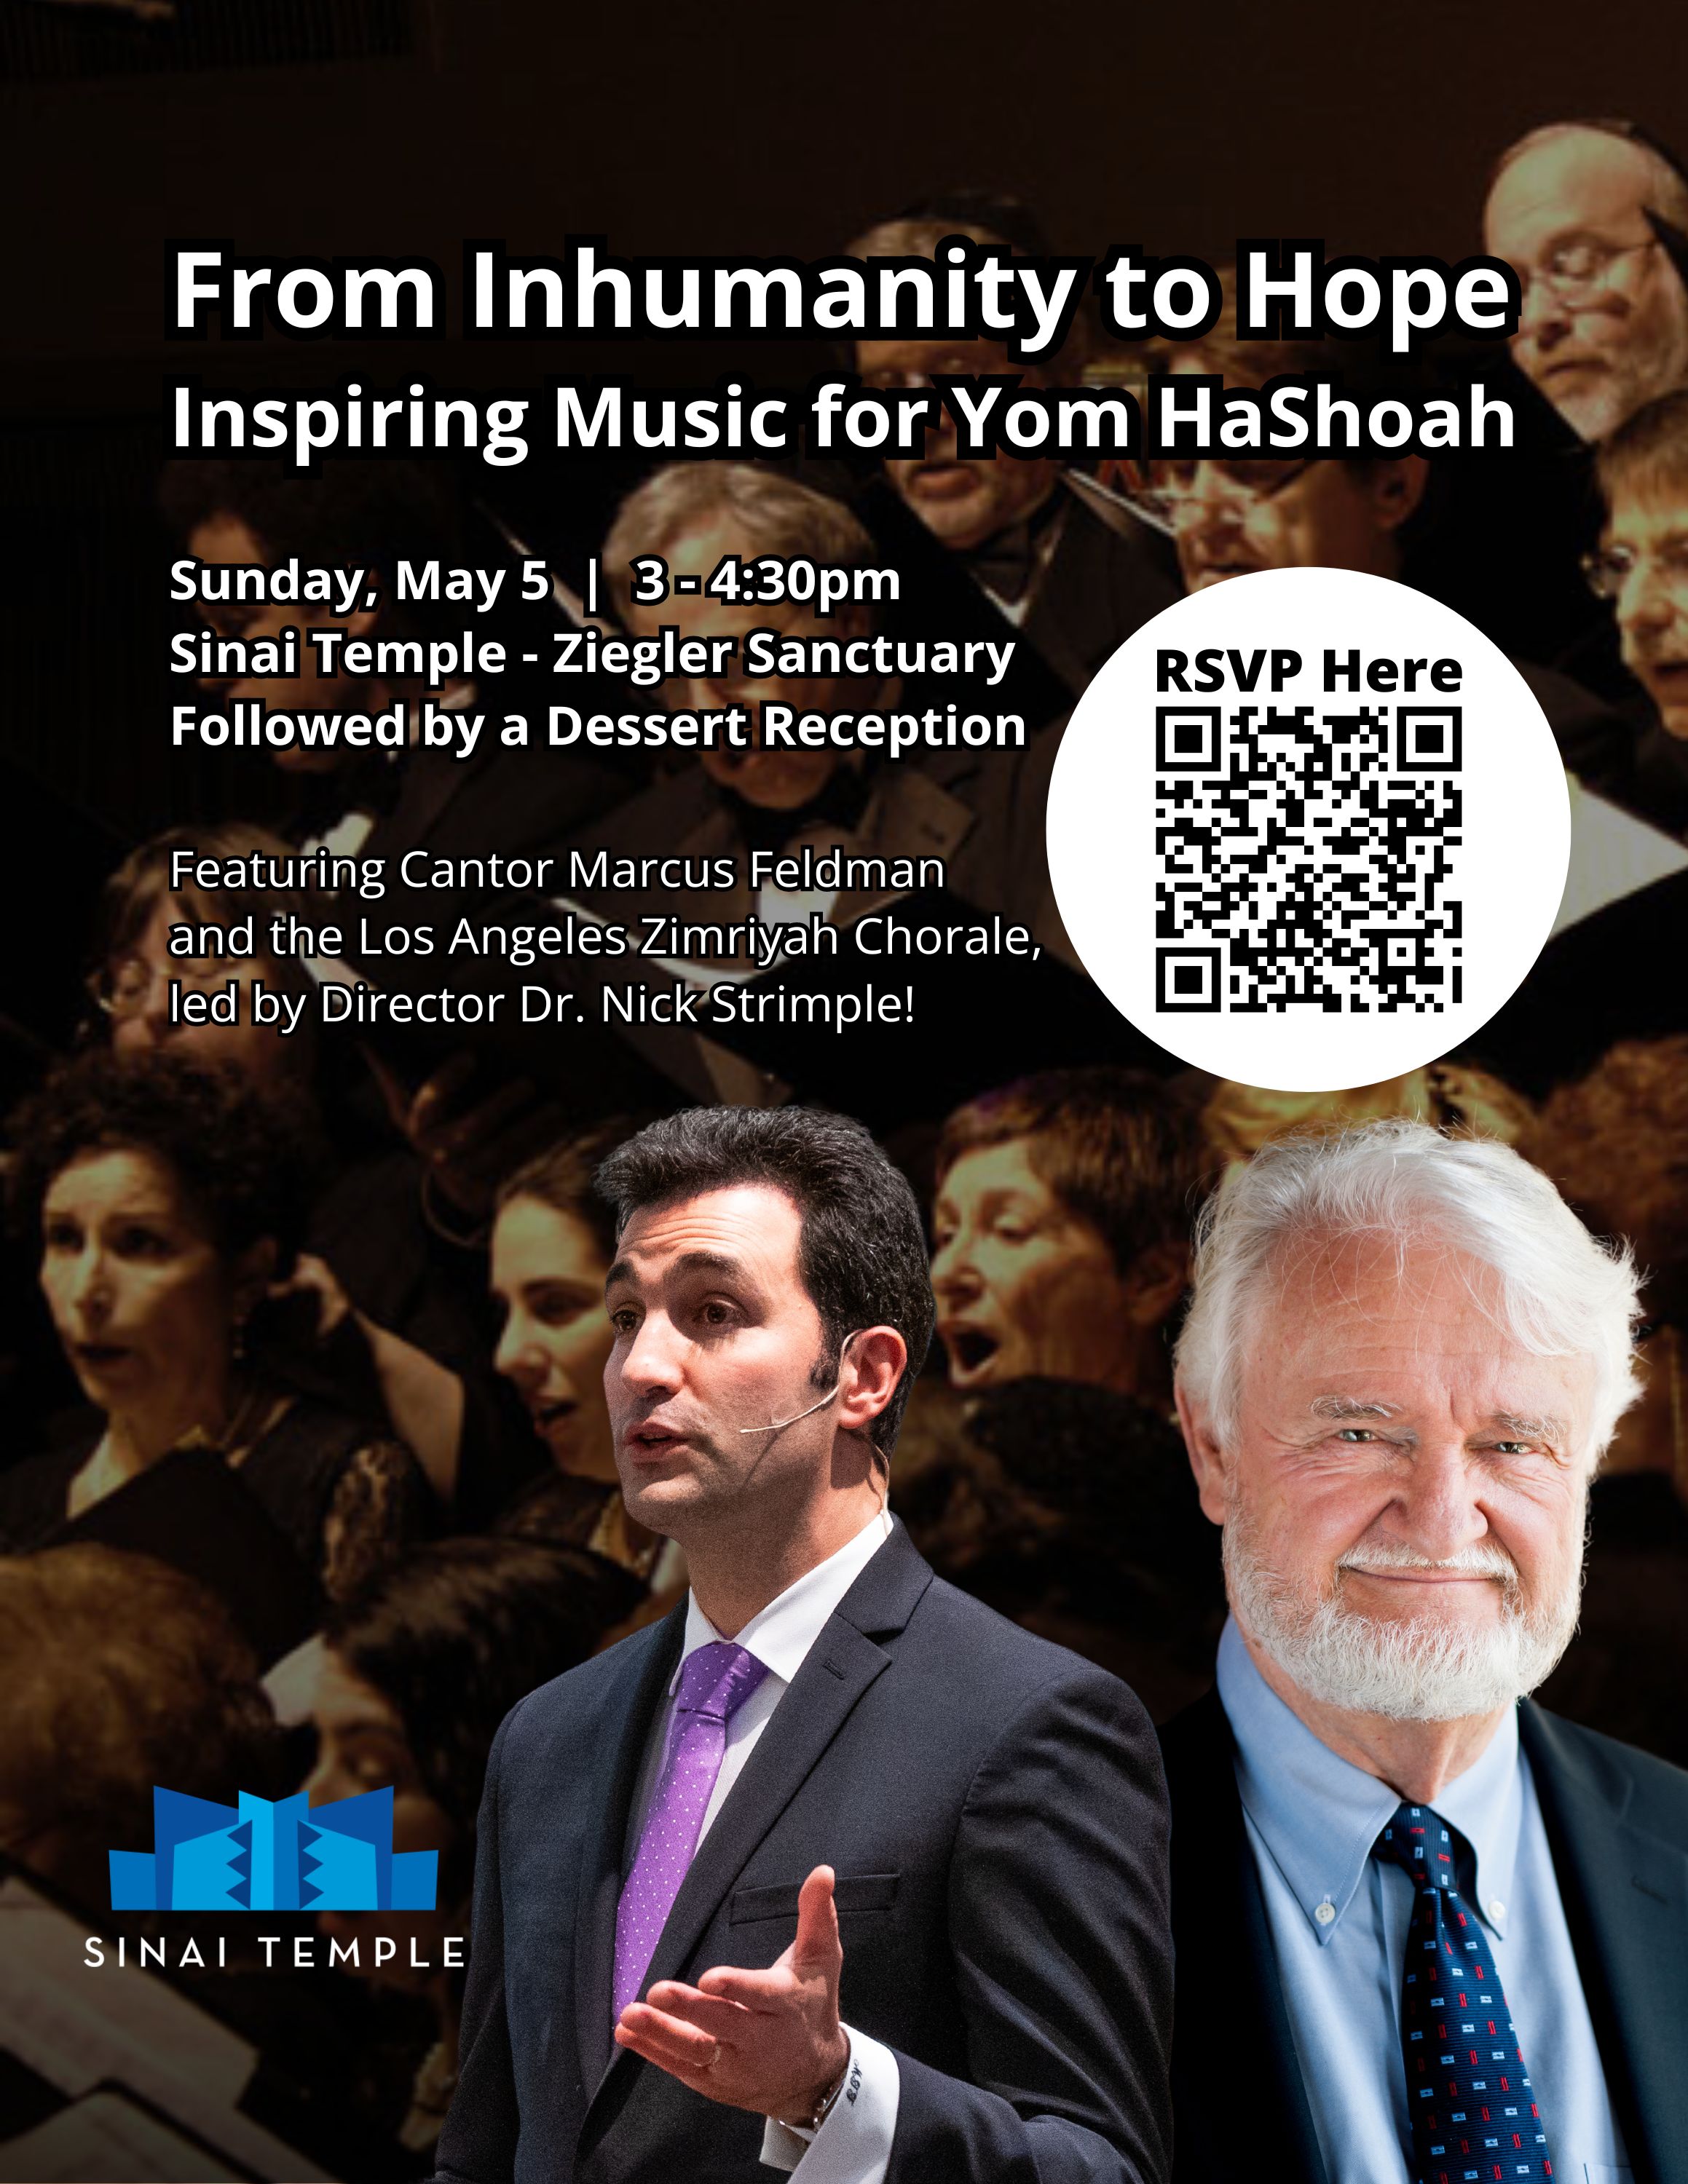 From Inhumanity to Hope farewell concert